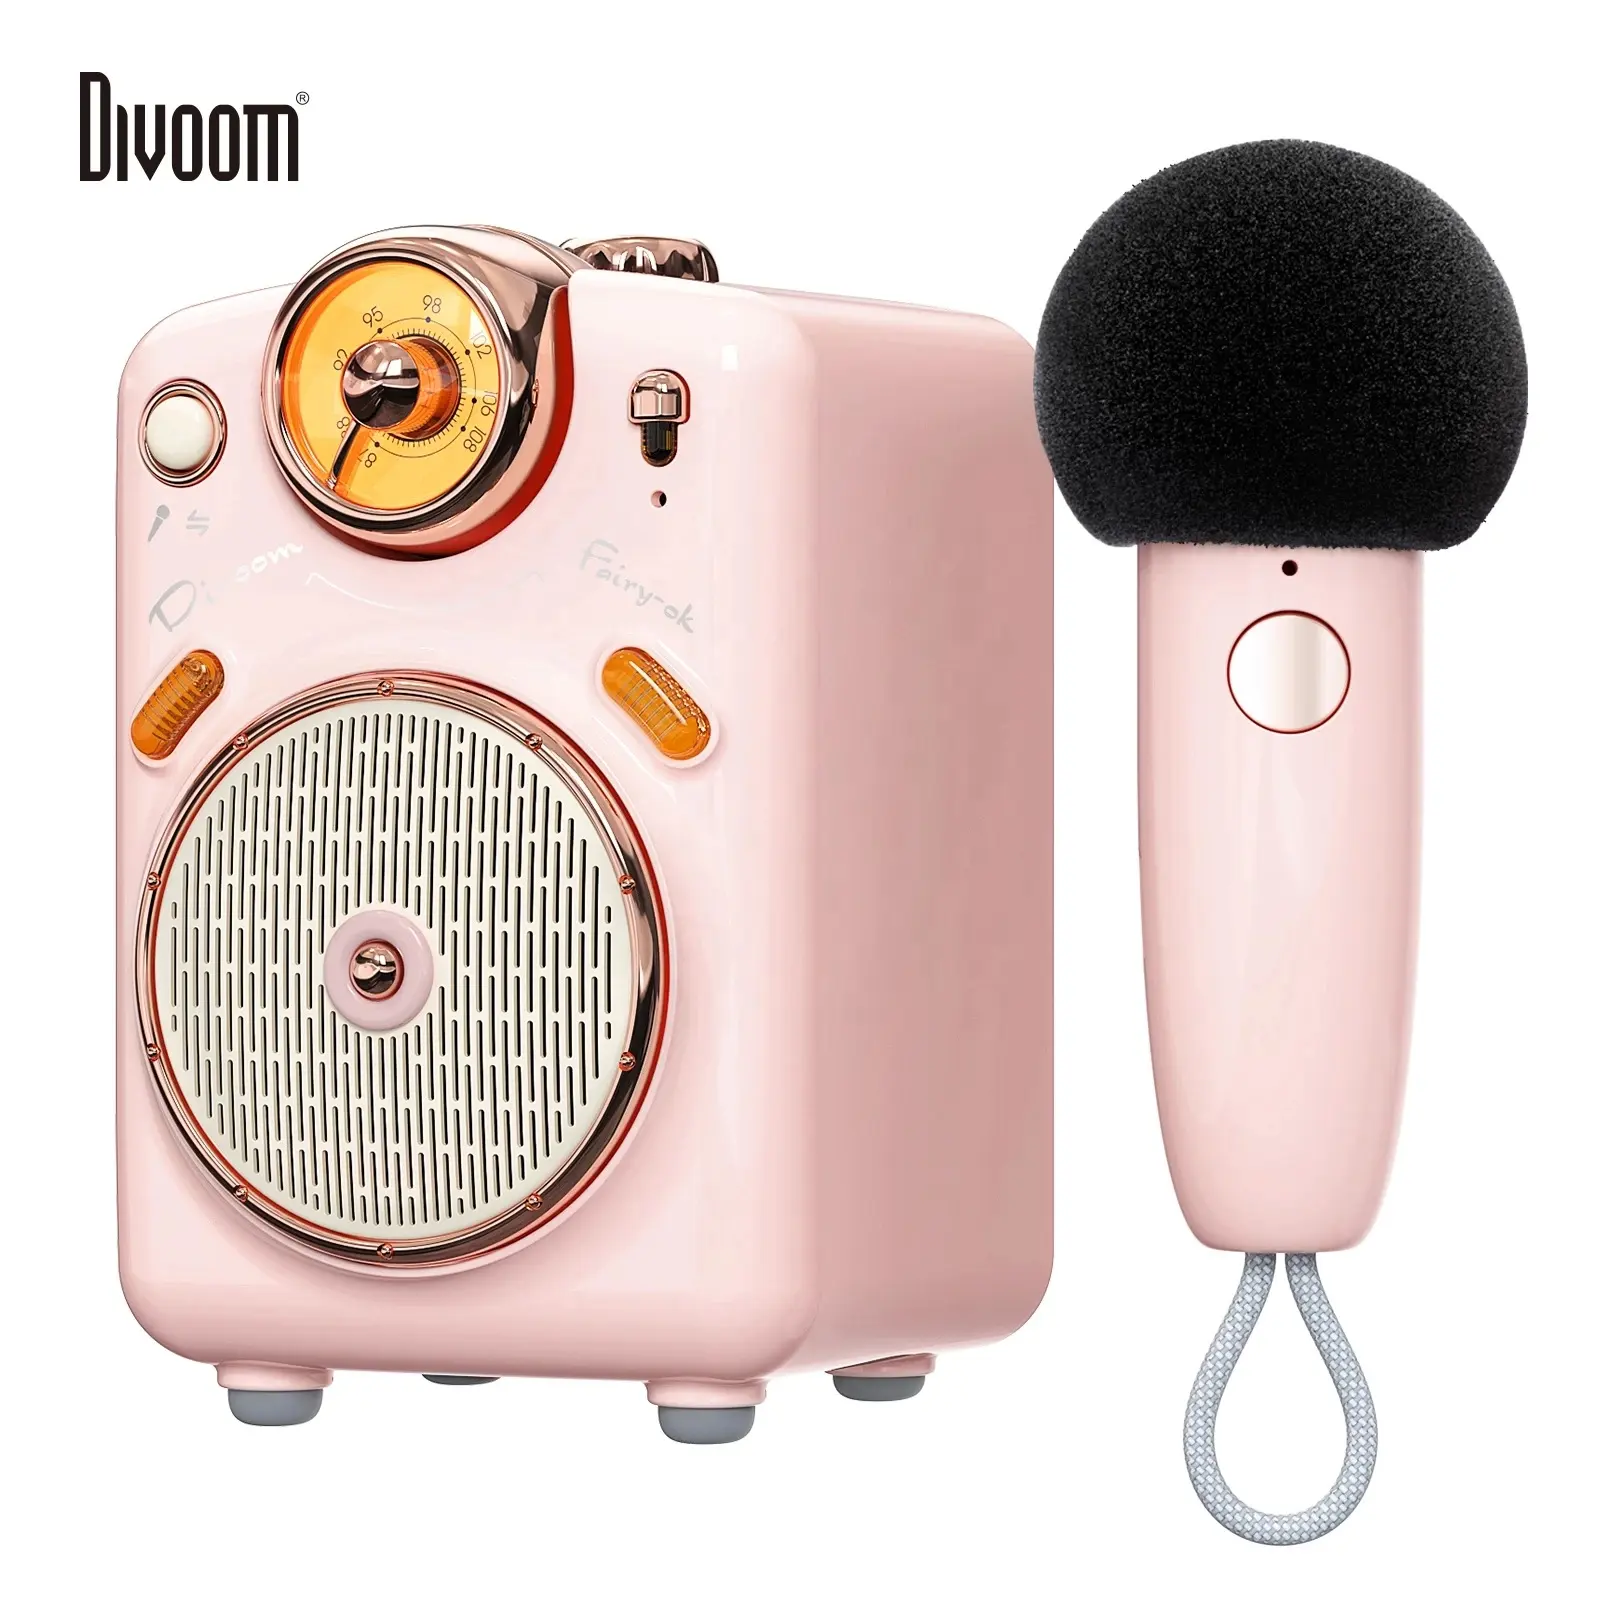 Original Divoom Fairy-OK Portable Blue tooth Speaker with Microphone Karaoke Function with Voice Change, FM Radio, TF Card